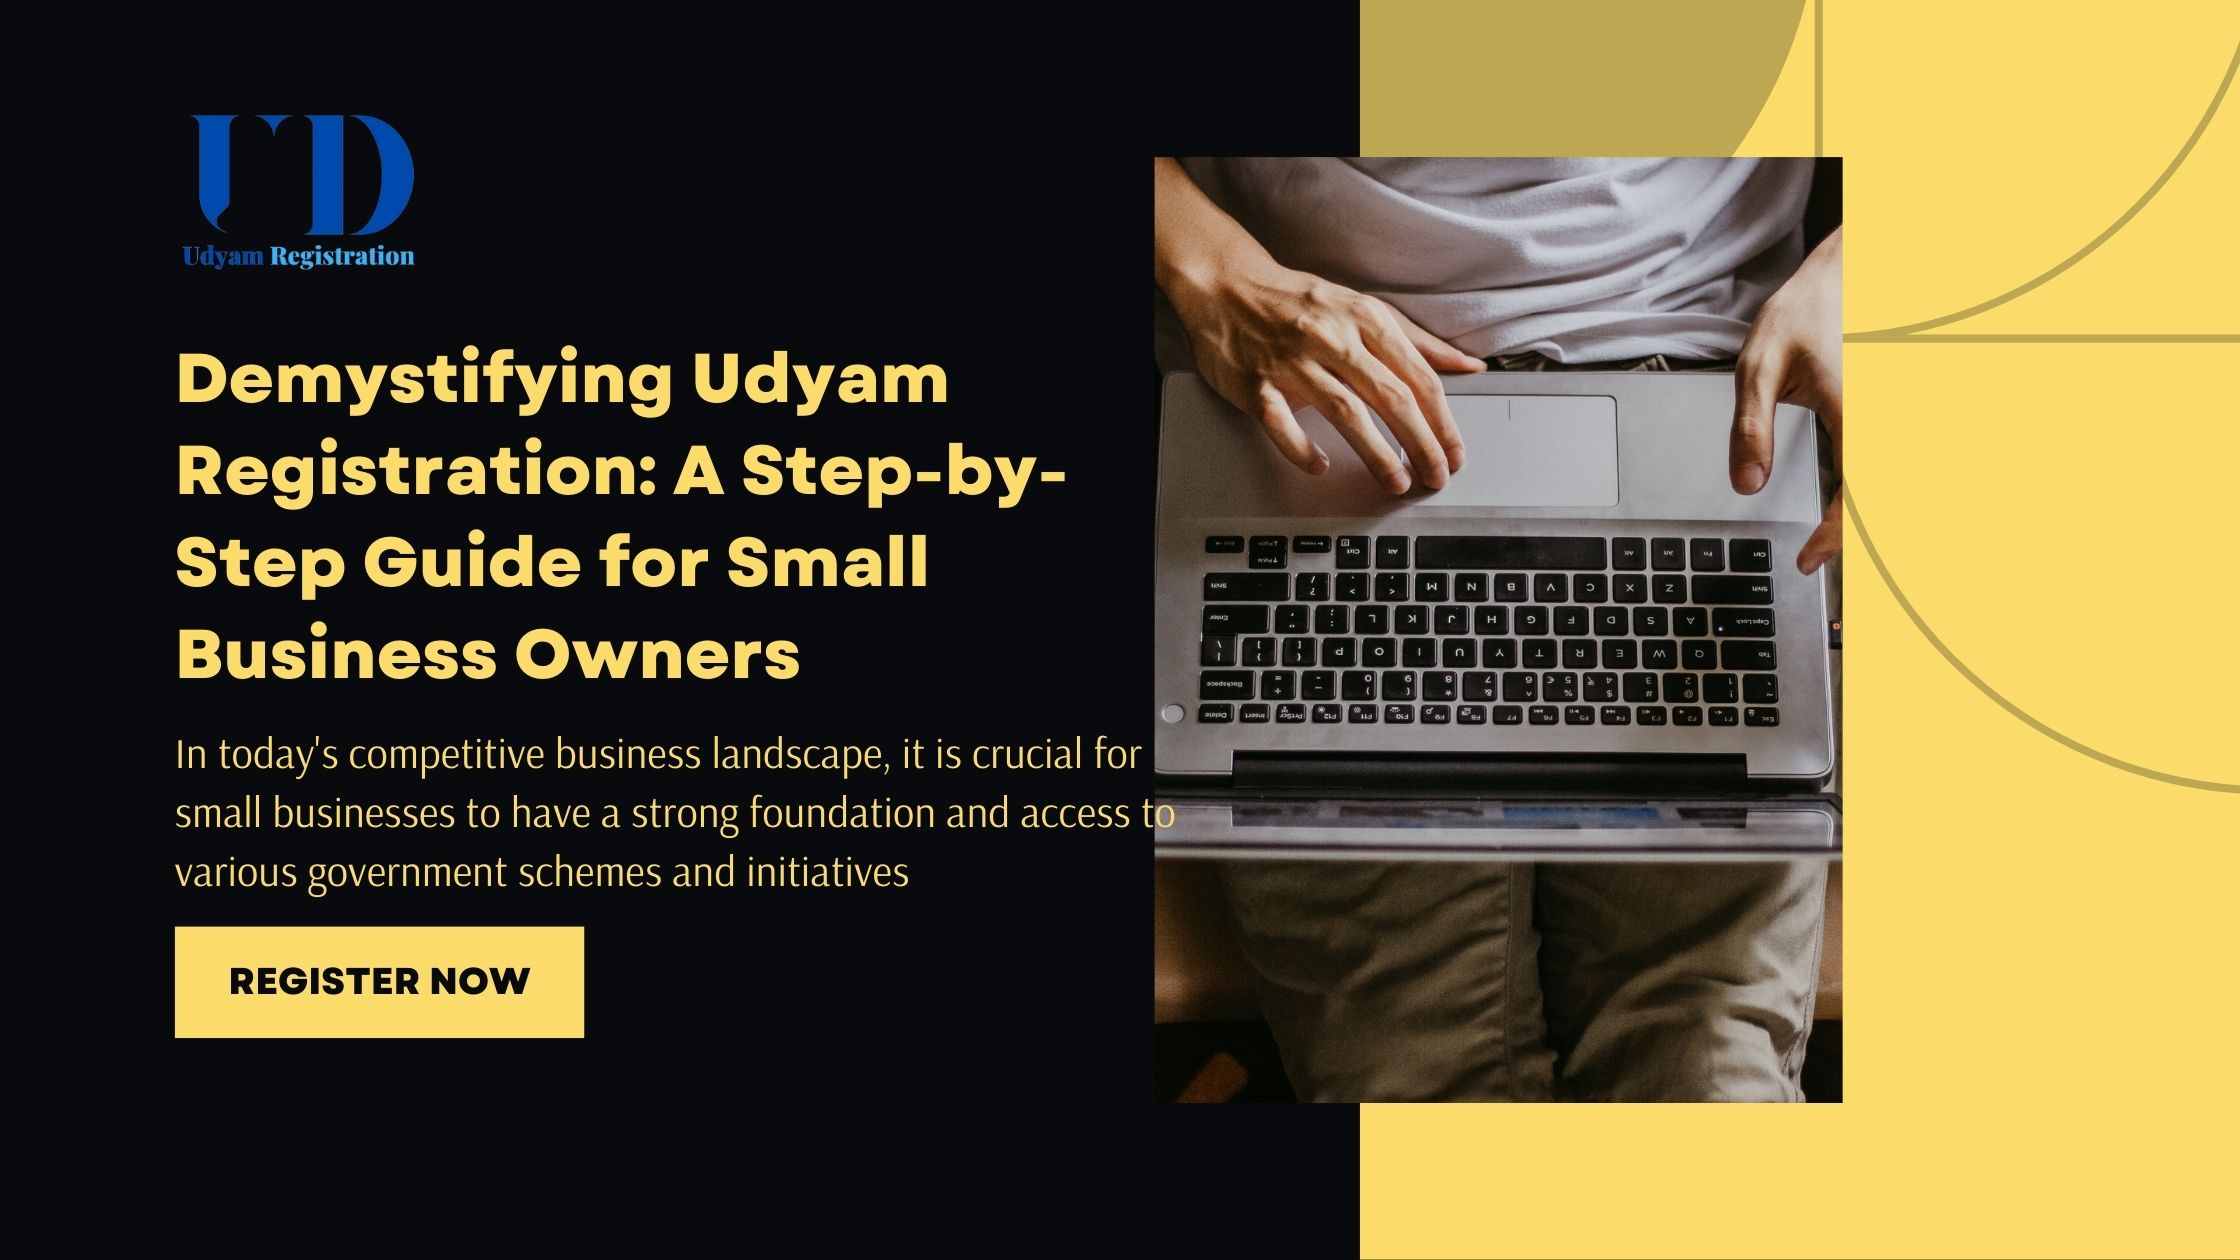 Demystifying Udyam Registration A Step-by-Step Guide for Small Business Owners